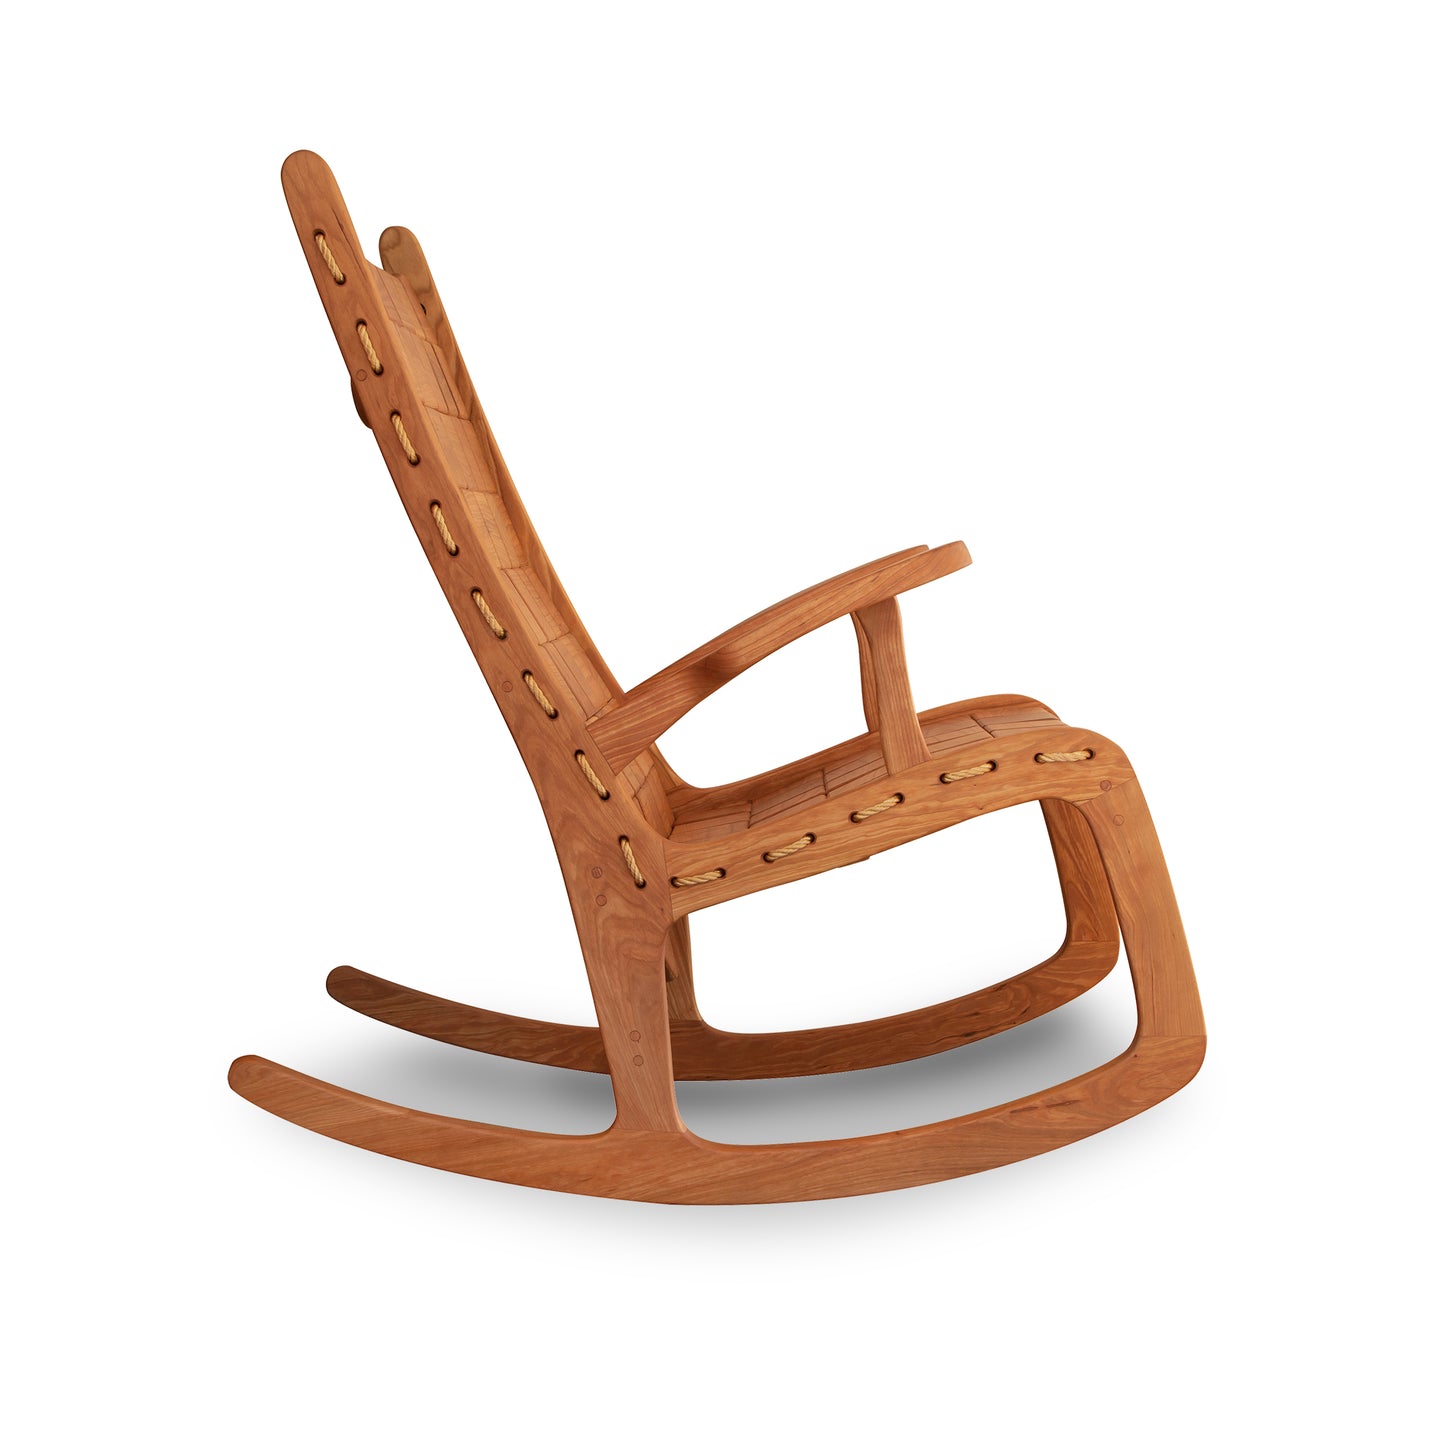 An eco-friendly Quilted Vermont Cherry Rocking Chair from Vermont Folk Rocker, offering superior comfort, showcased against a pristine white background.